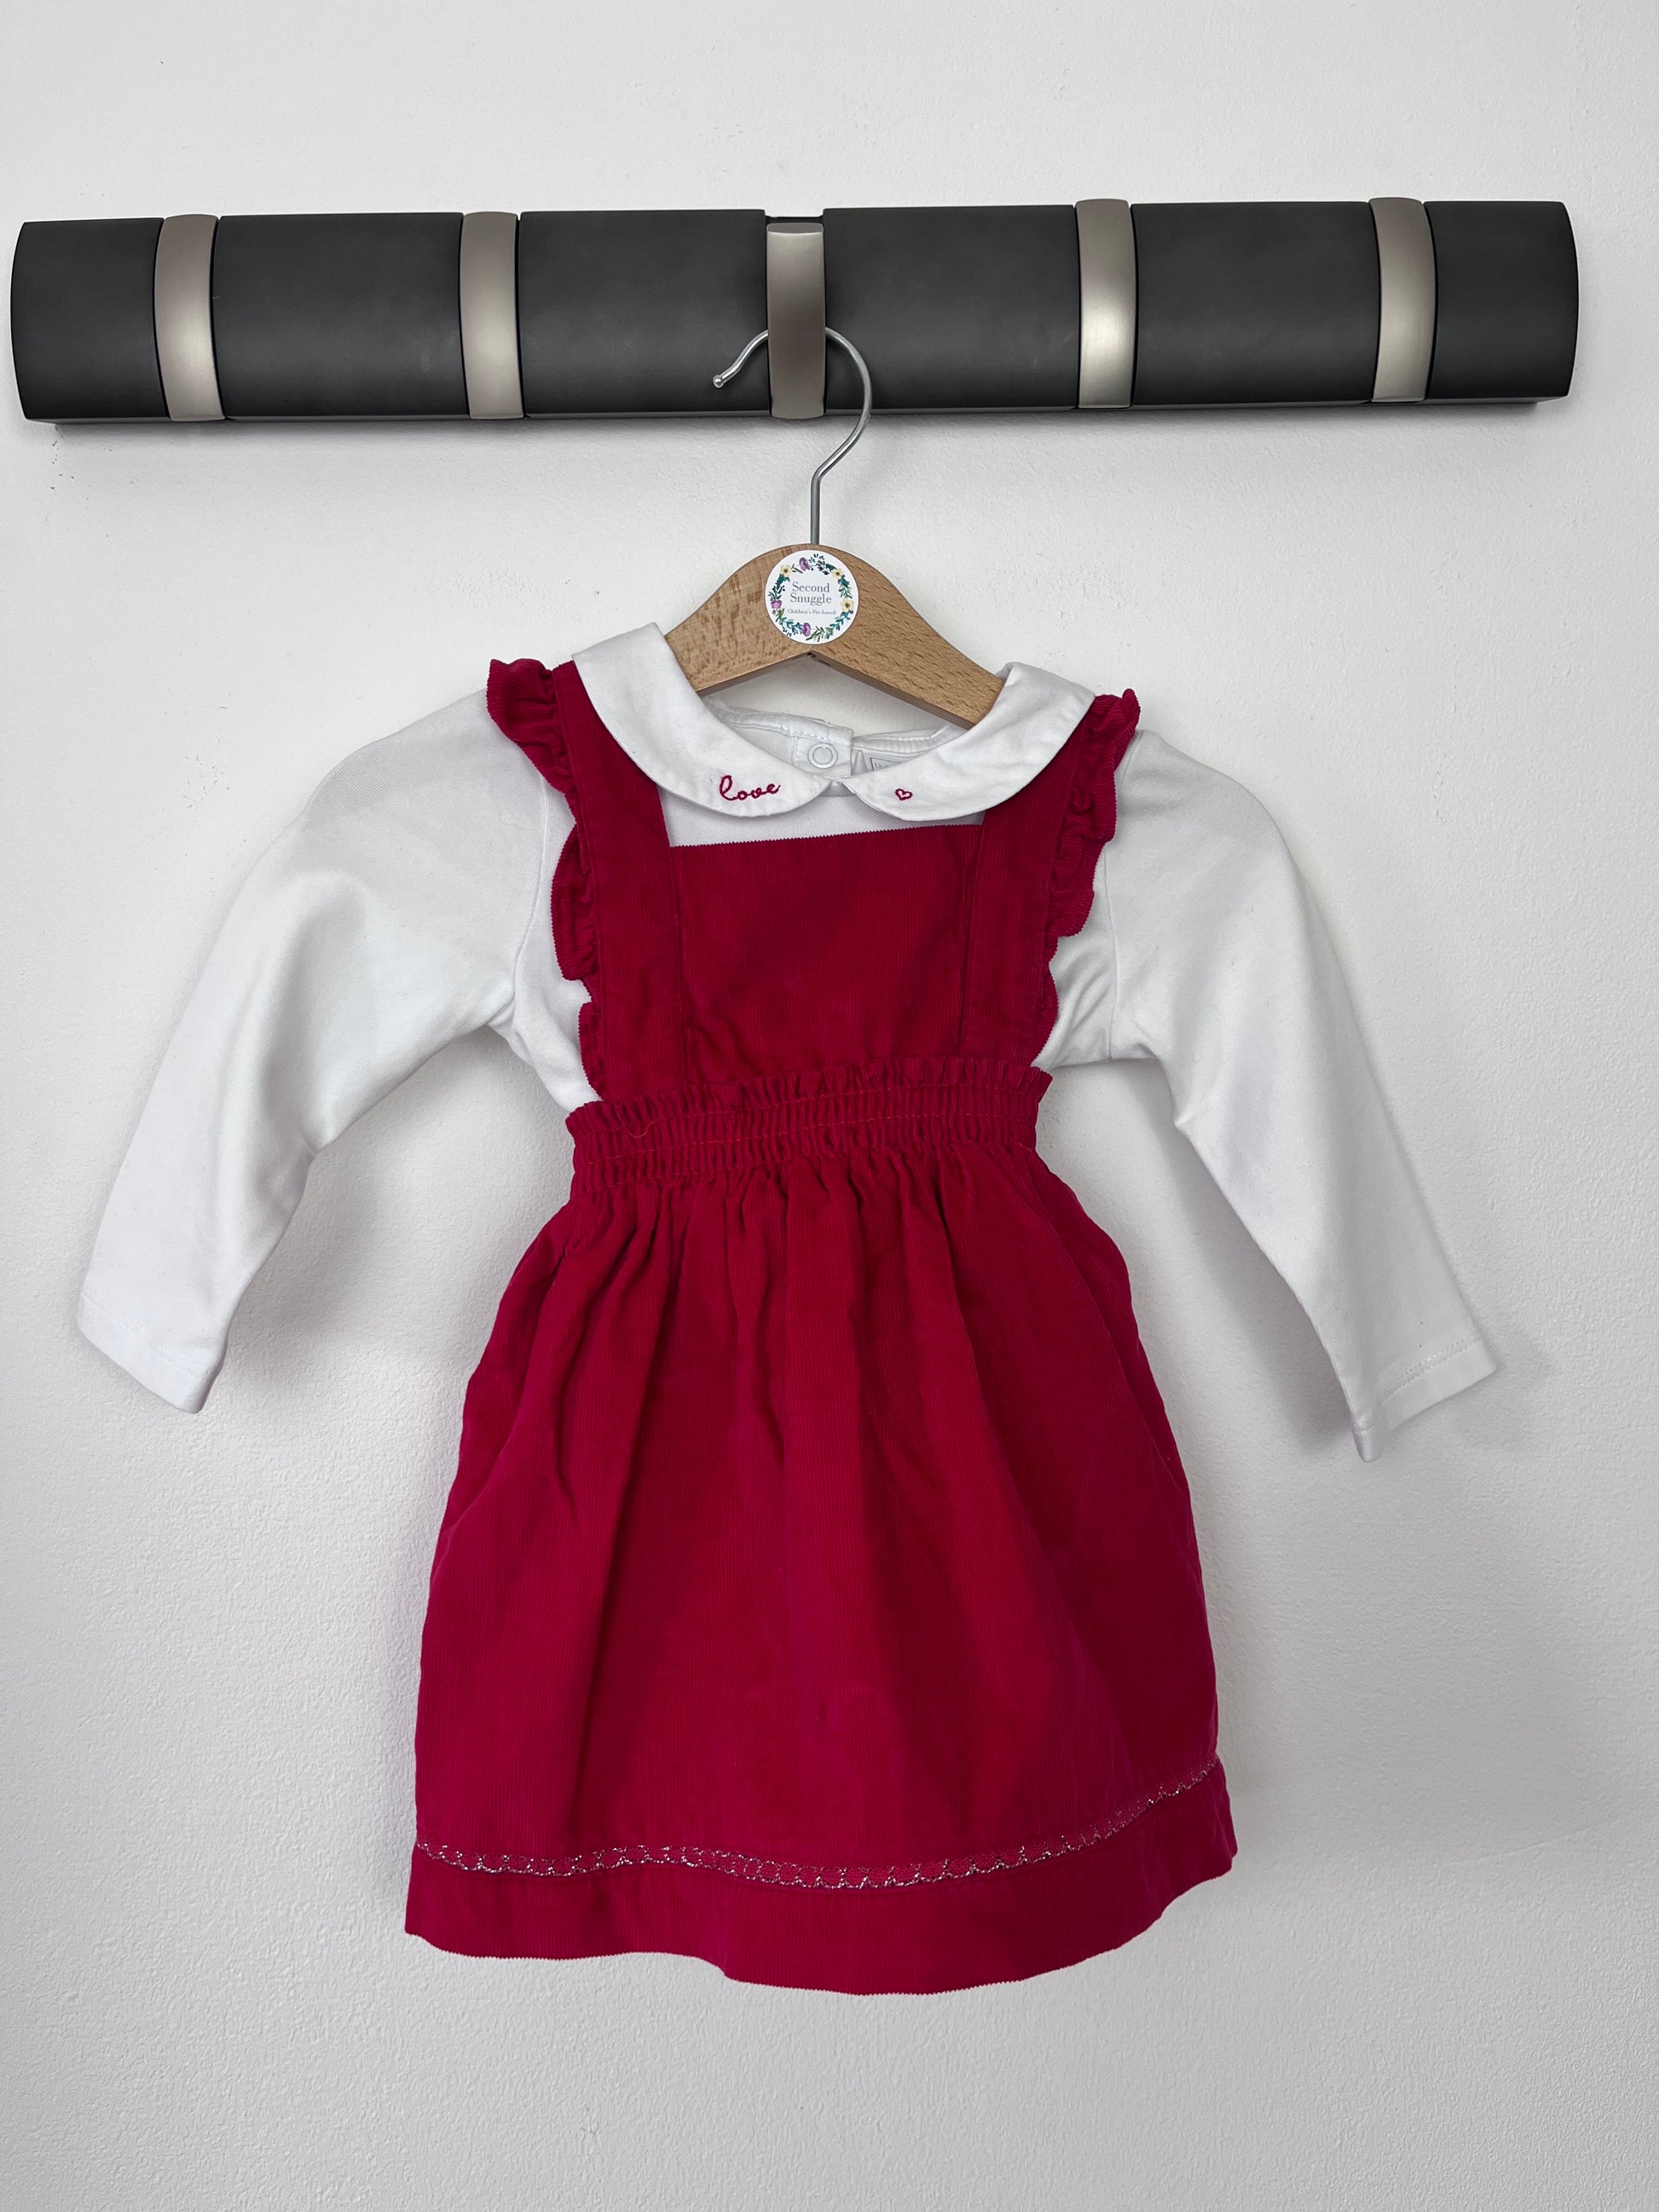 The Little White Company 6-9 Months-Dresses-Second Snuggle Preloved